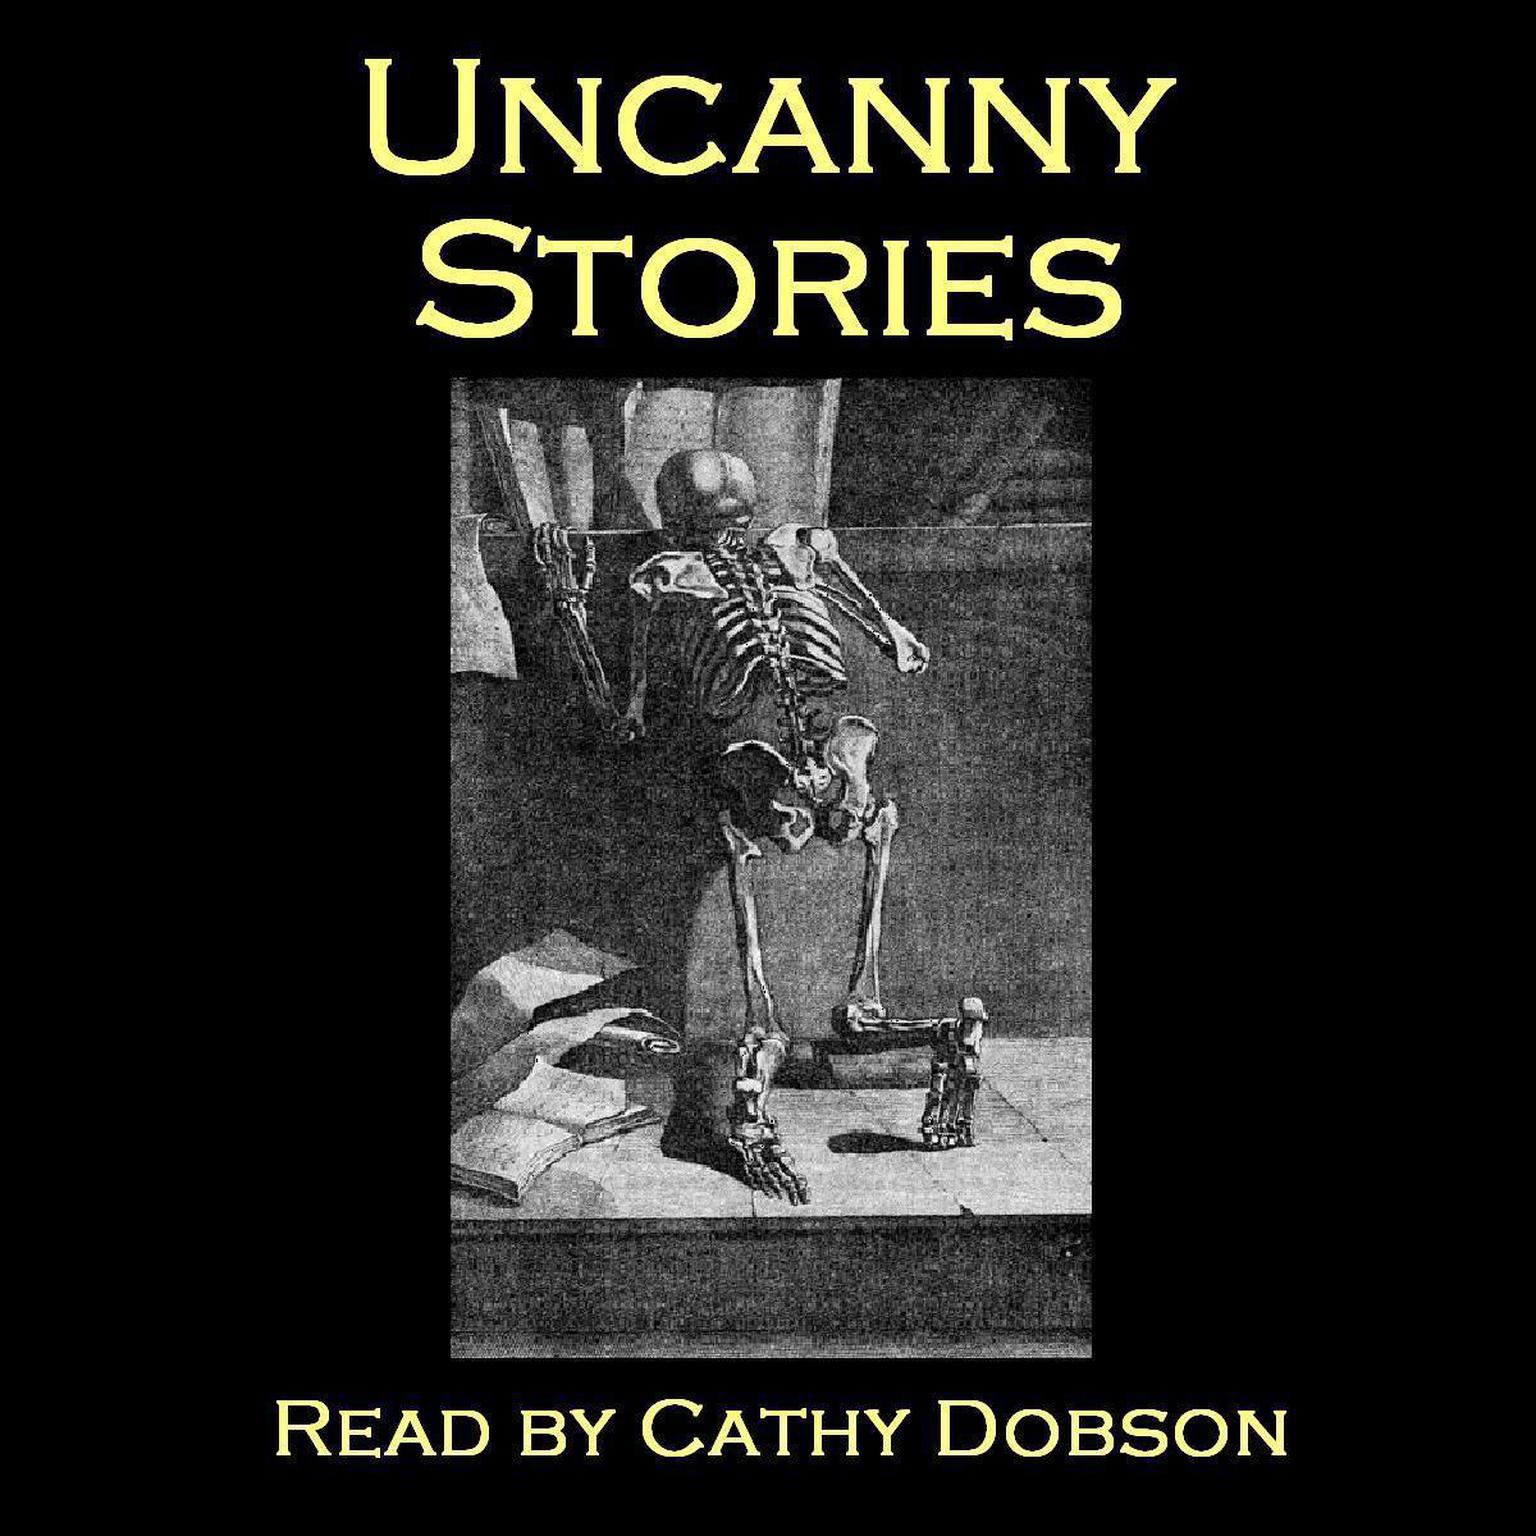 Uncanny Stories Audiobook, by various authors